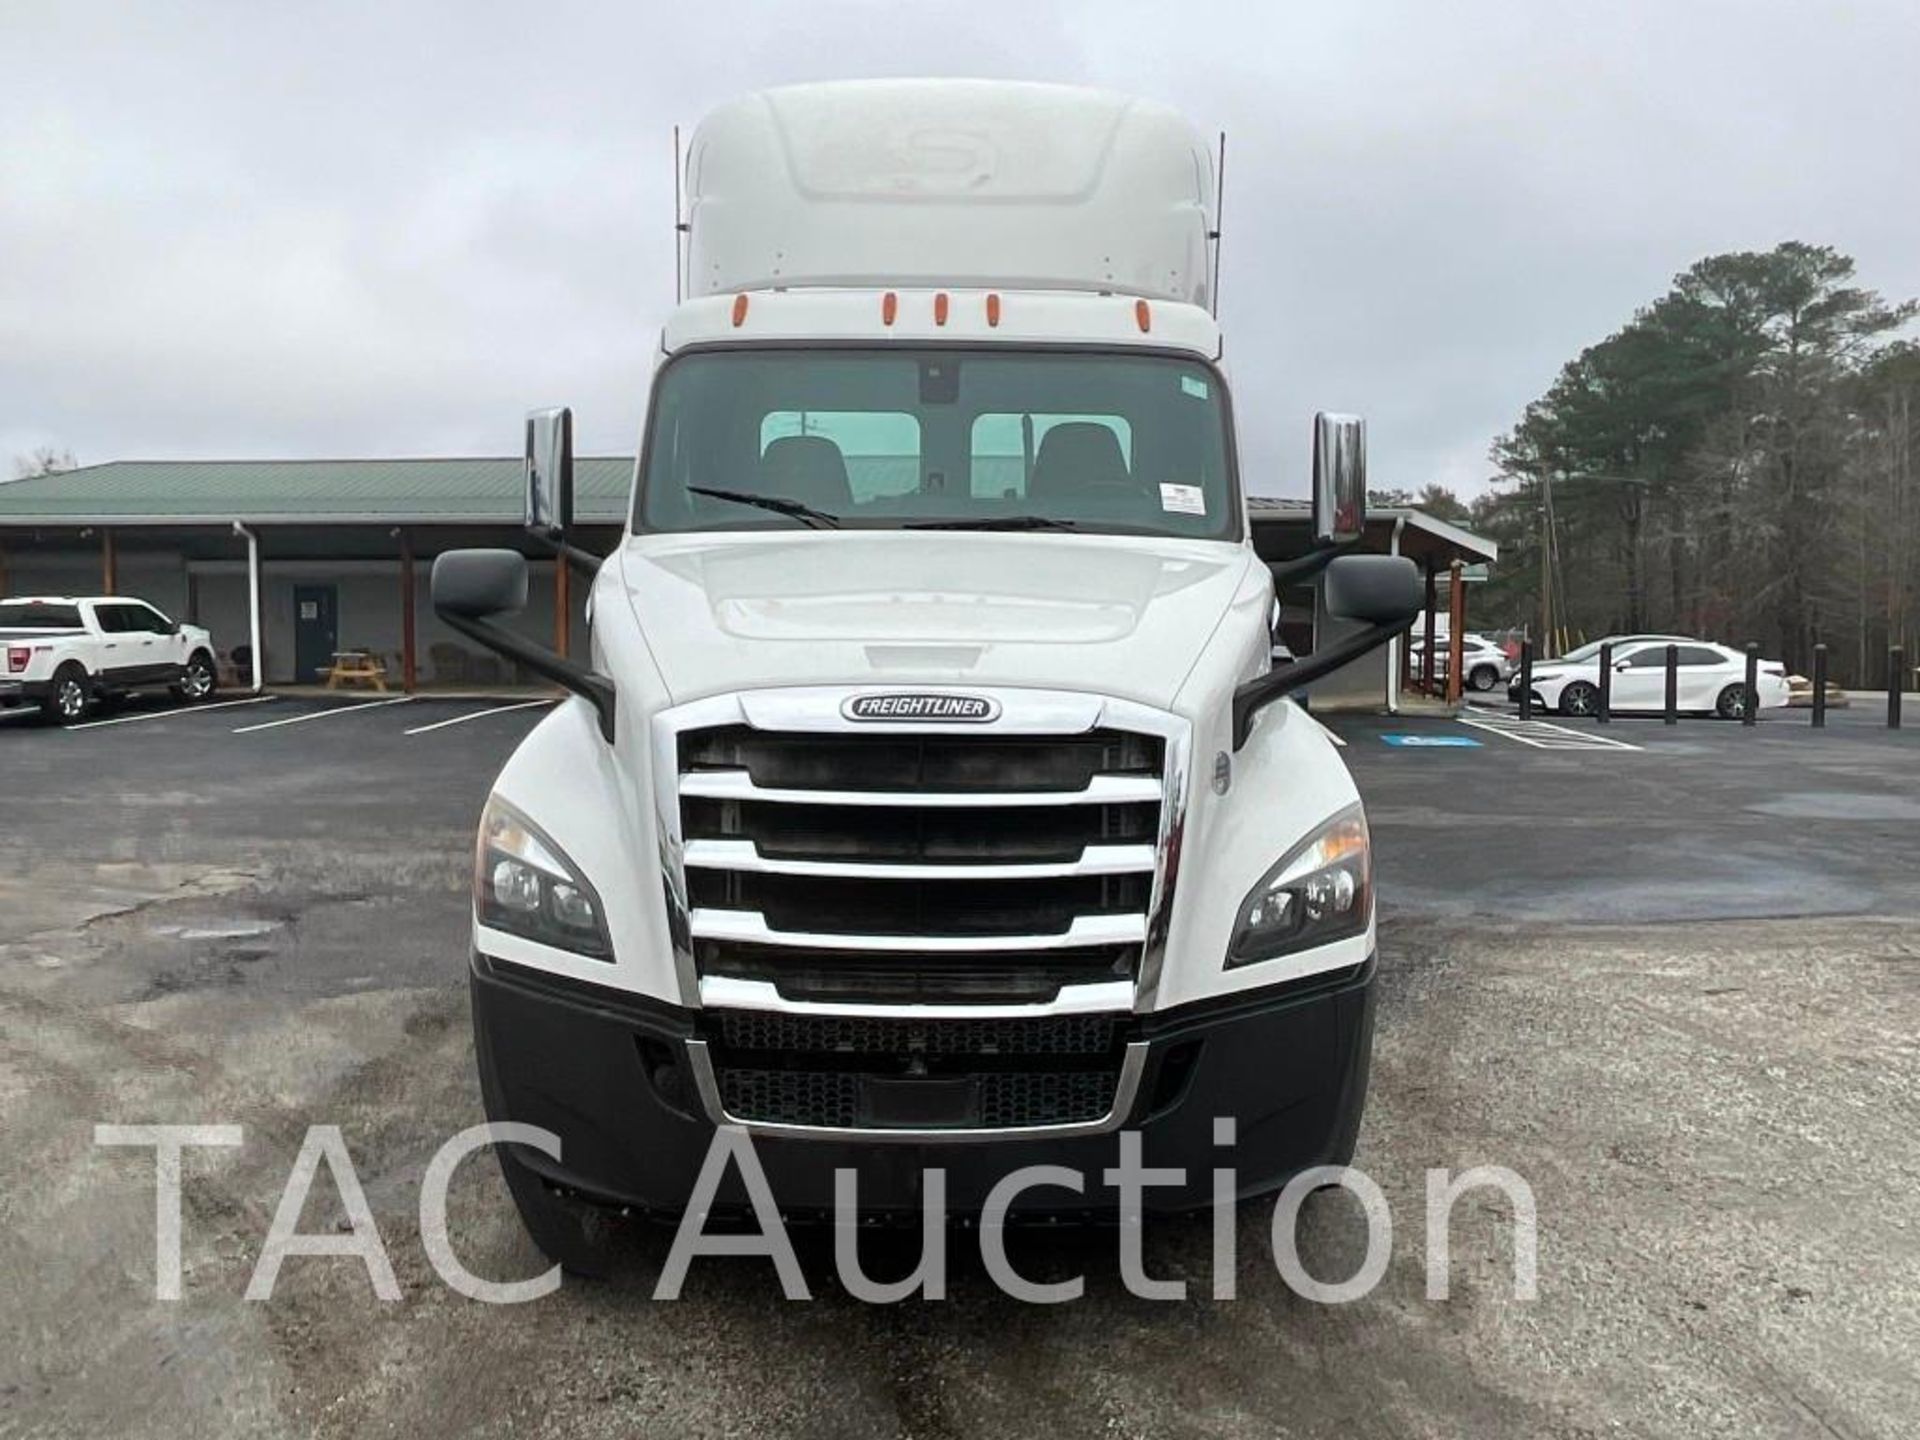 2019 Freightliner Cascadia Day Cab - Image 2 of 59